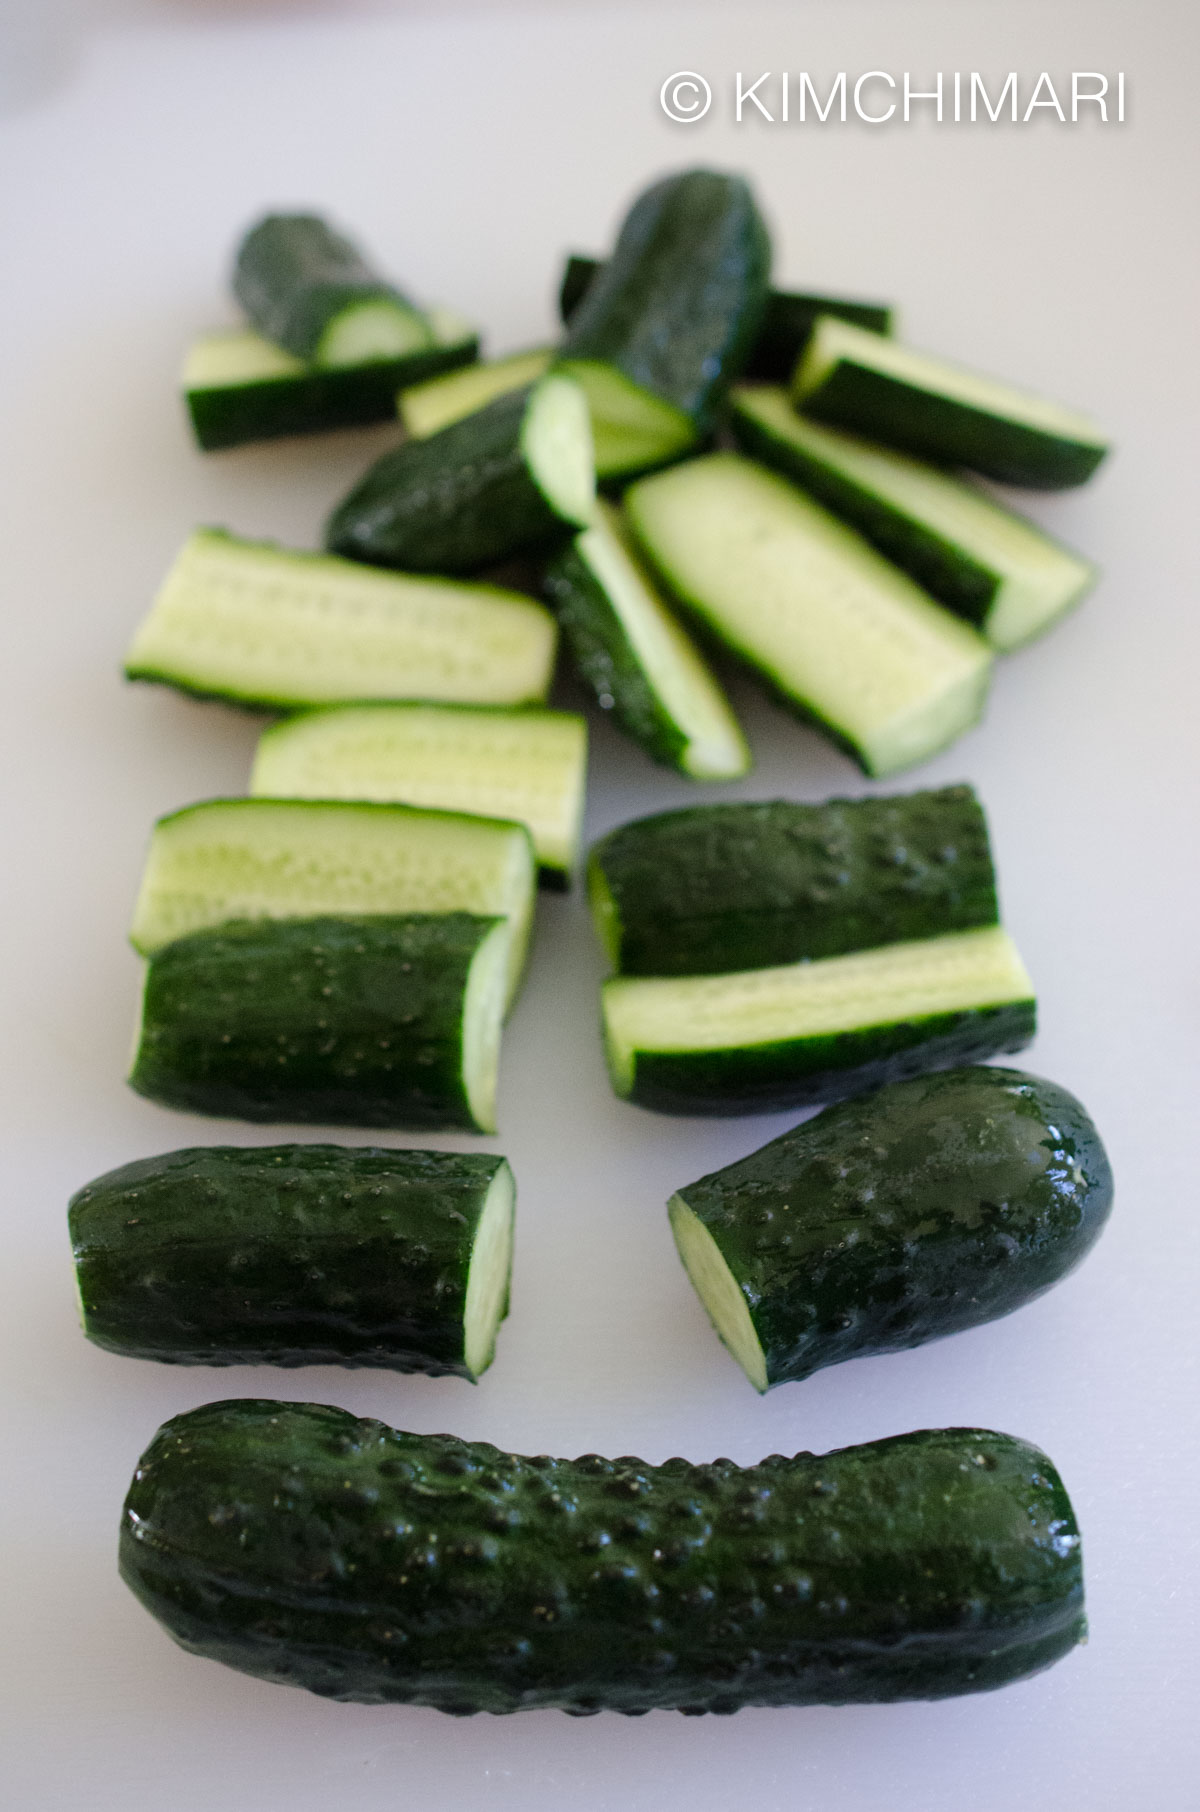 showing stages of cutting cucumbers